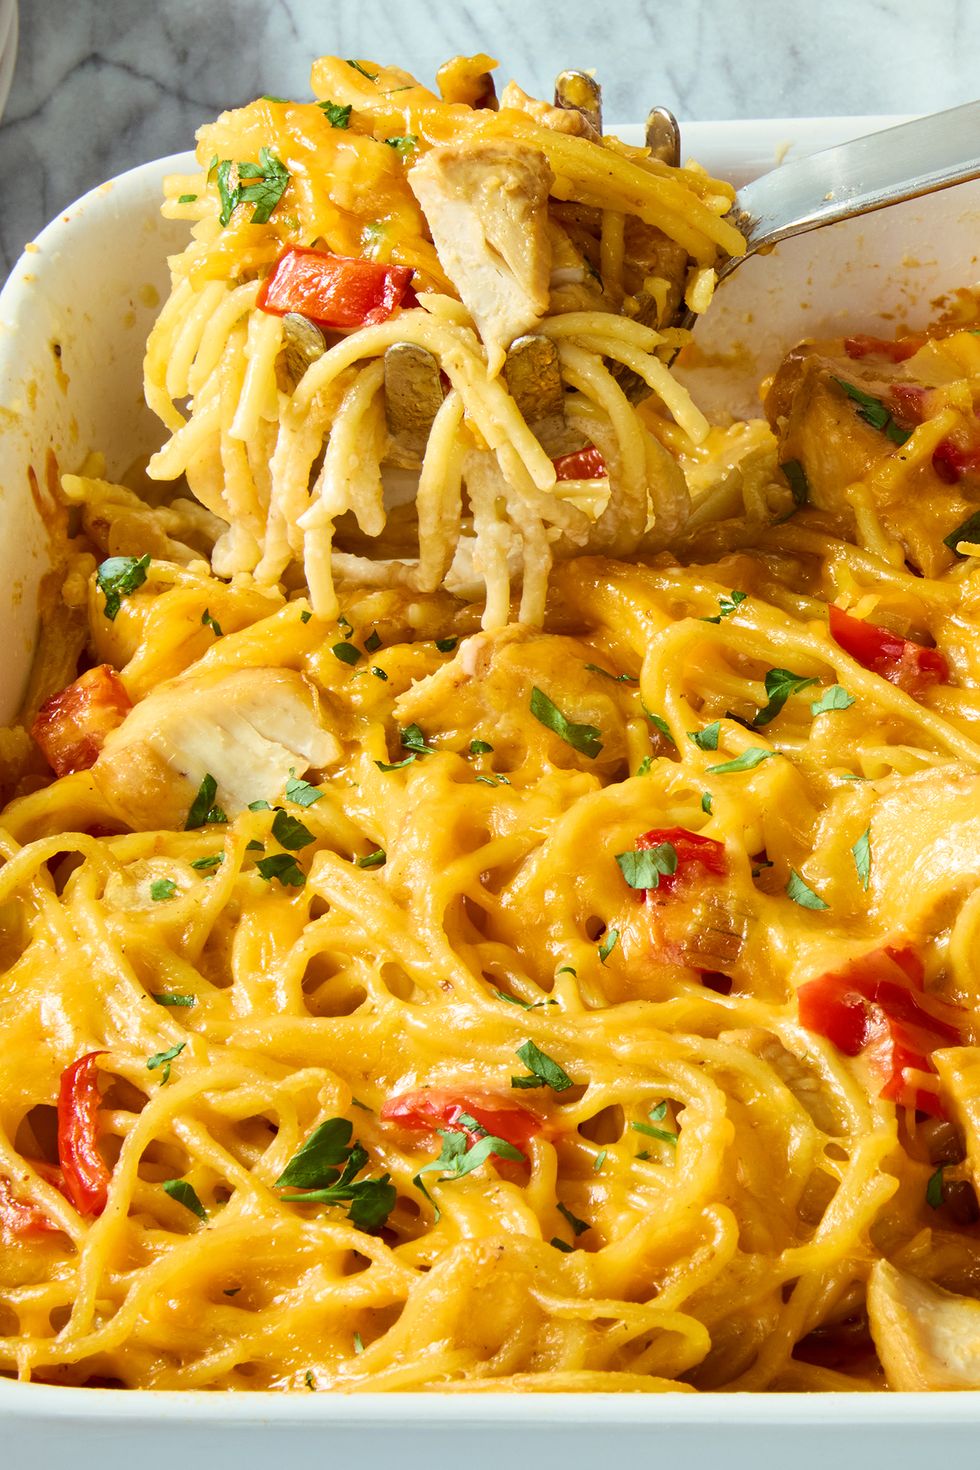 chicken, spaghetti, and red peppers covered in cheese in a casserole